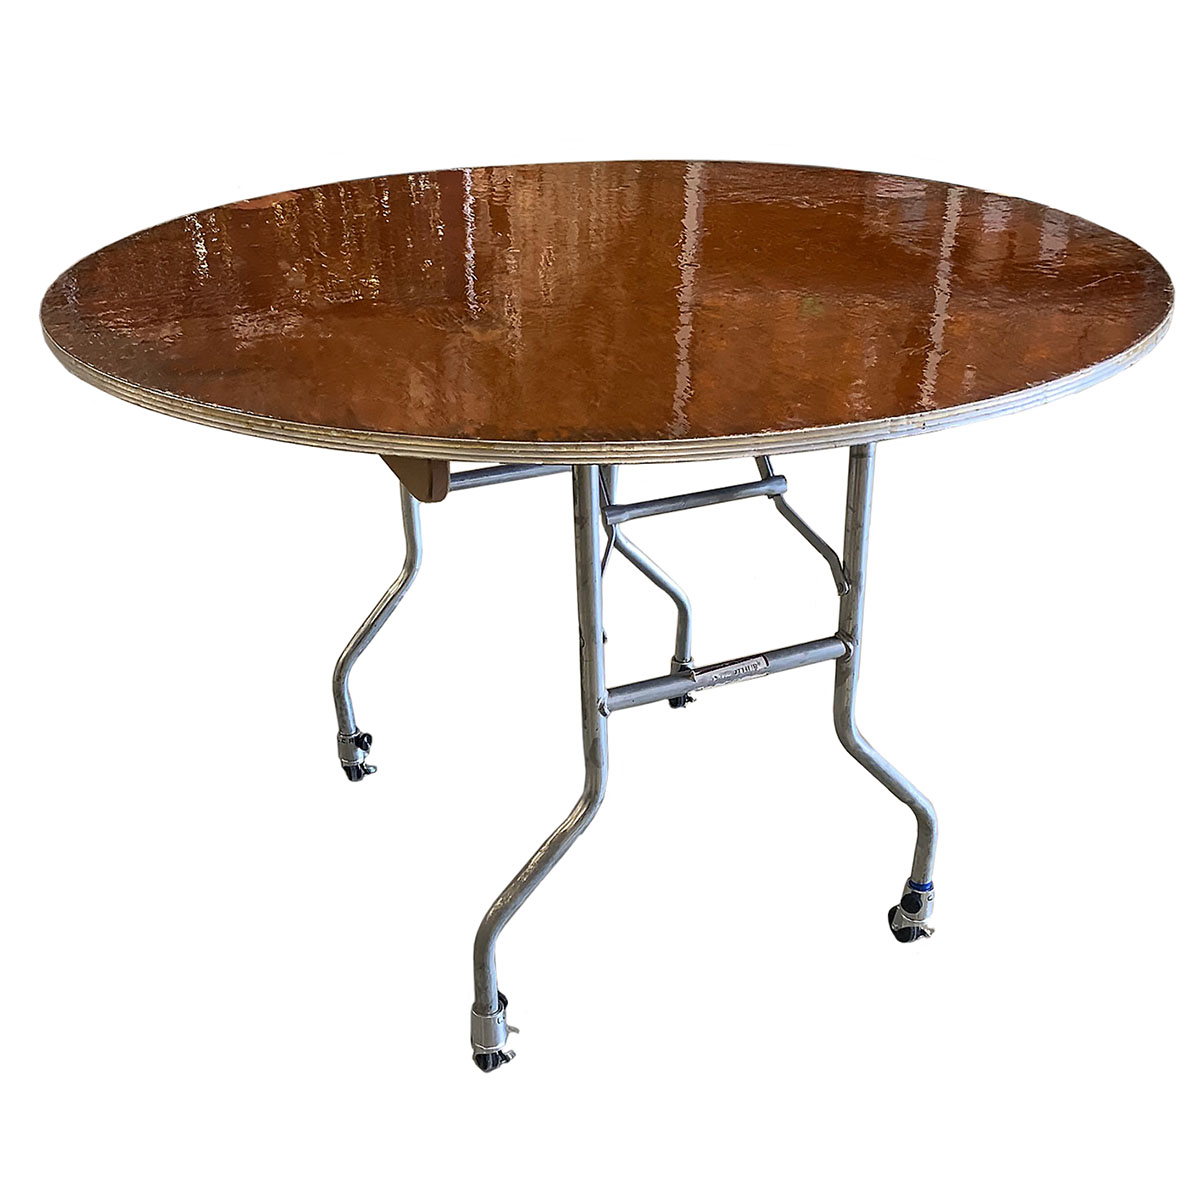 48" Round Table With Locking Wheels 